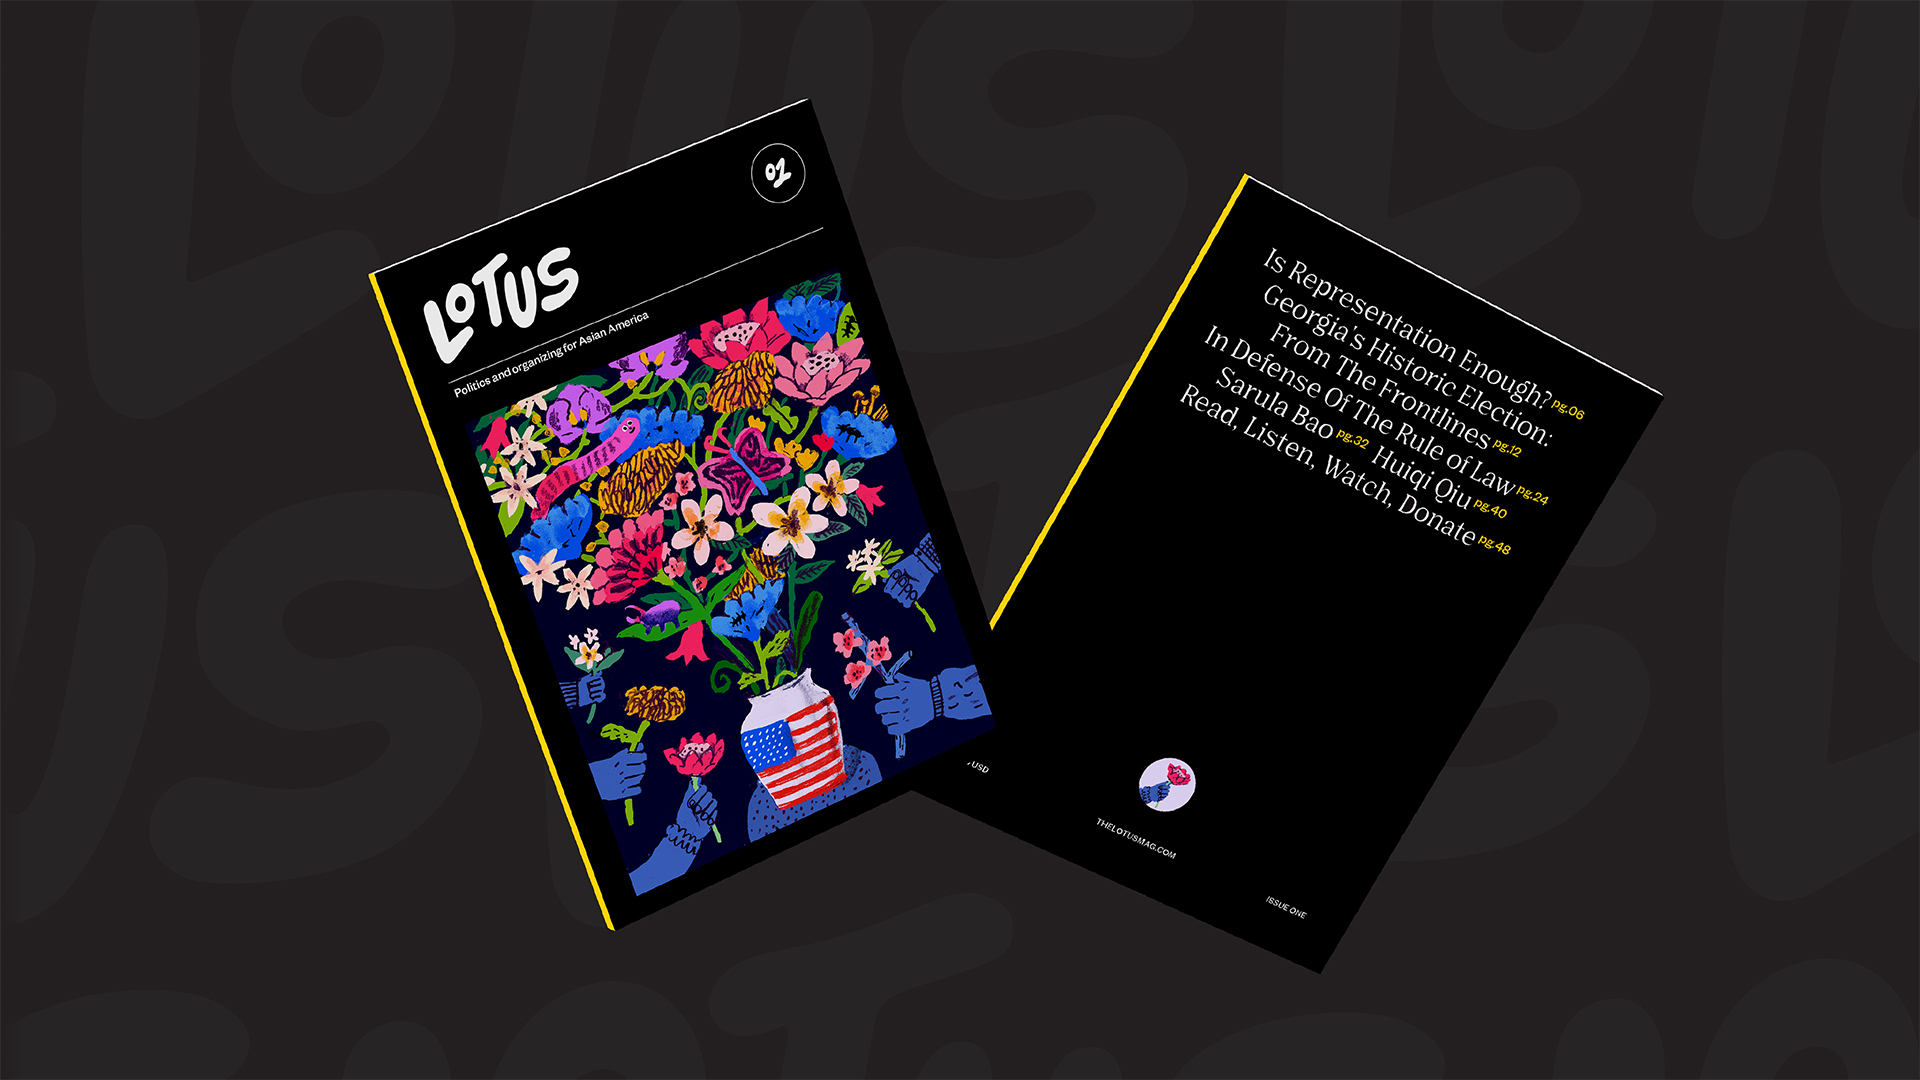 Lotus magazine cover and back mocked up